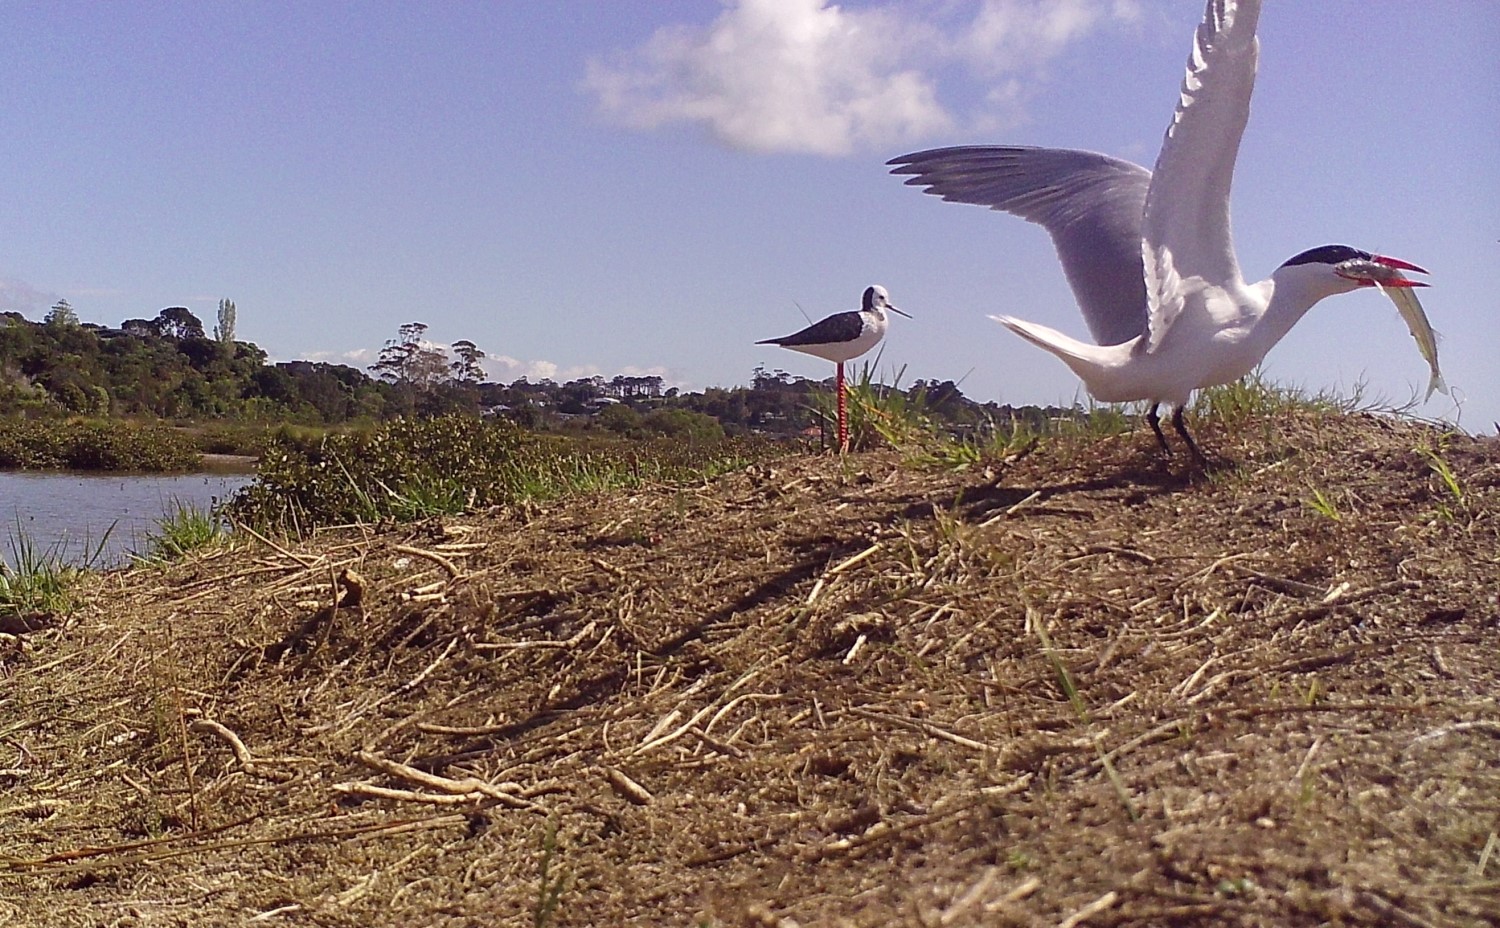 Caspian tern on the restored roost, next to the 3D printed decoy.